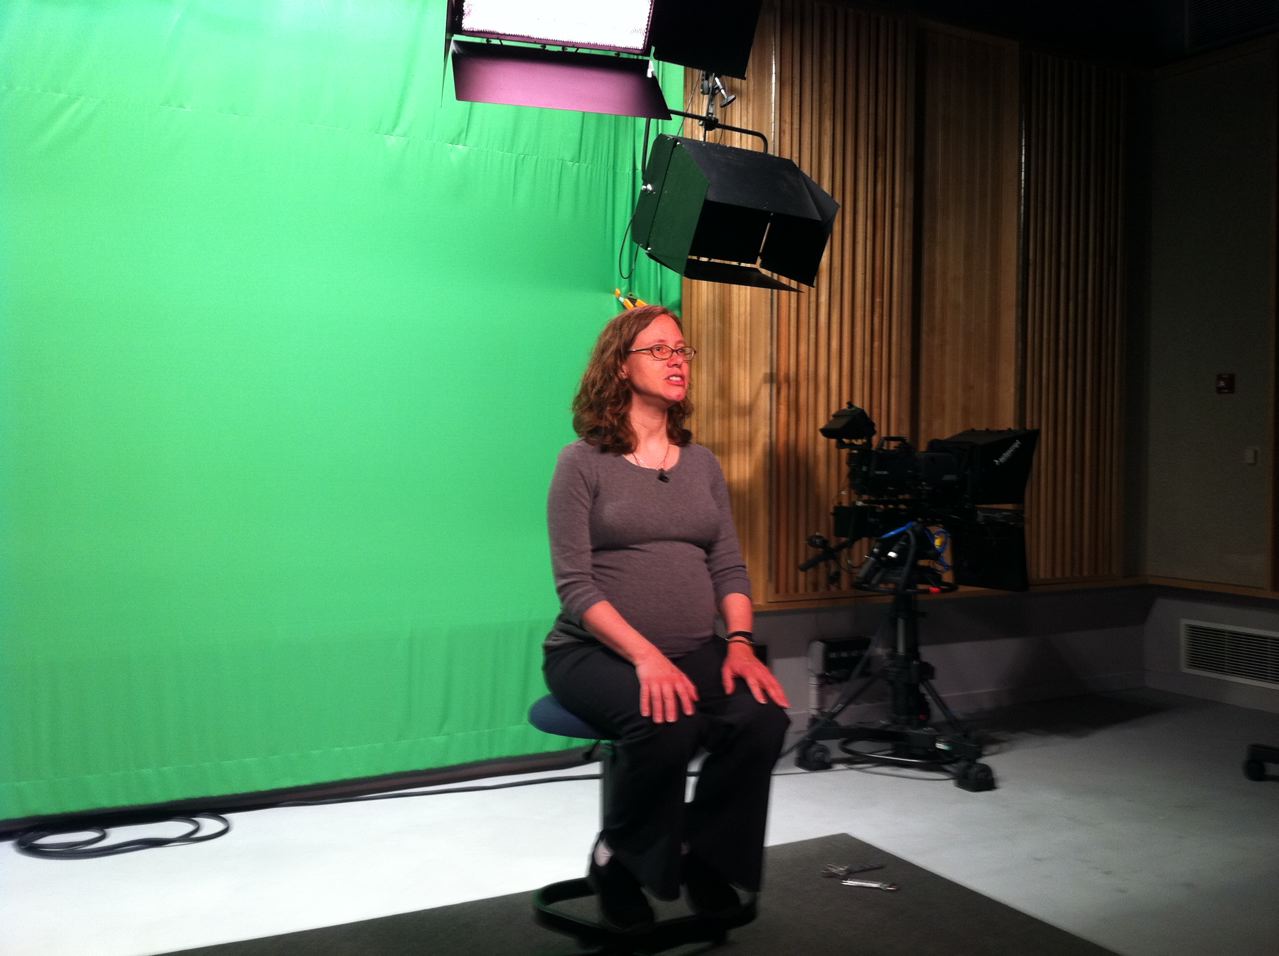 Science Librarian, Jennifer King, sitting in front of a green screen